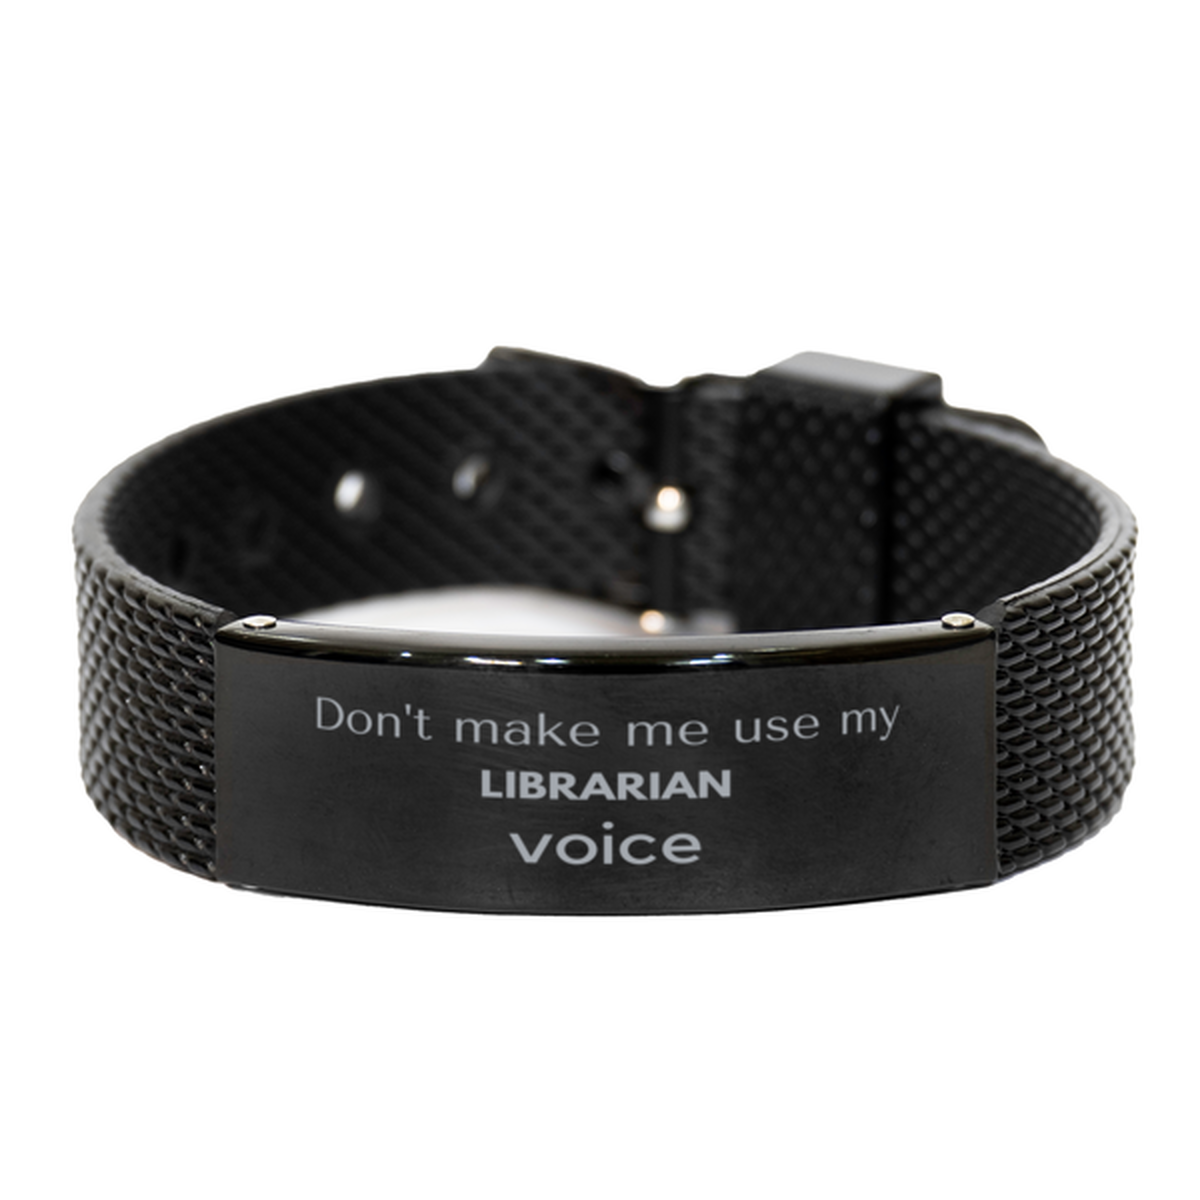 Don't make me use my Librarian voice, Sarcasm Librarian Gifts, Christmas Librarian Black Shark Mesh Bracelet Birthday Unique Gifts For Librarian Coworkers, Men, Women, Colleague, Friends